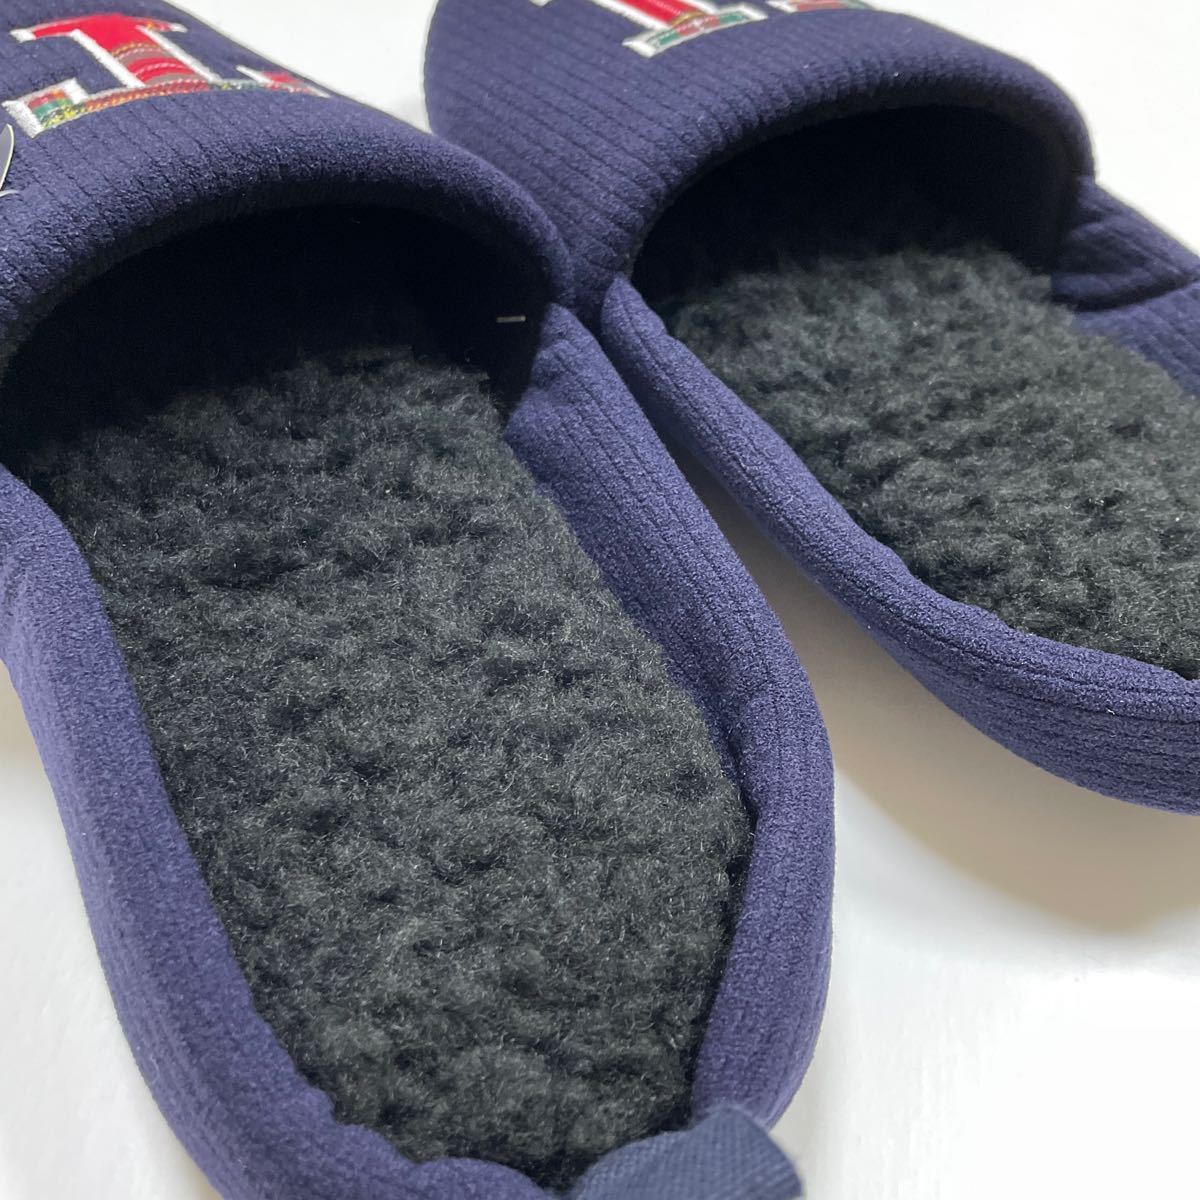  new goods Tommy Hilfiger slippers room shoes boa 